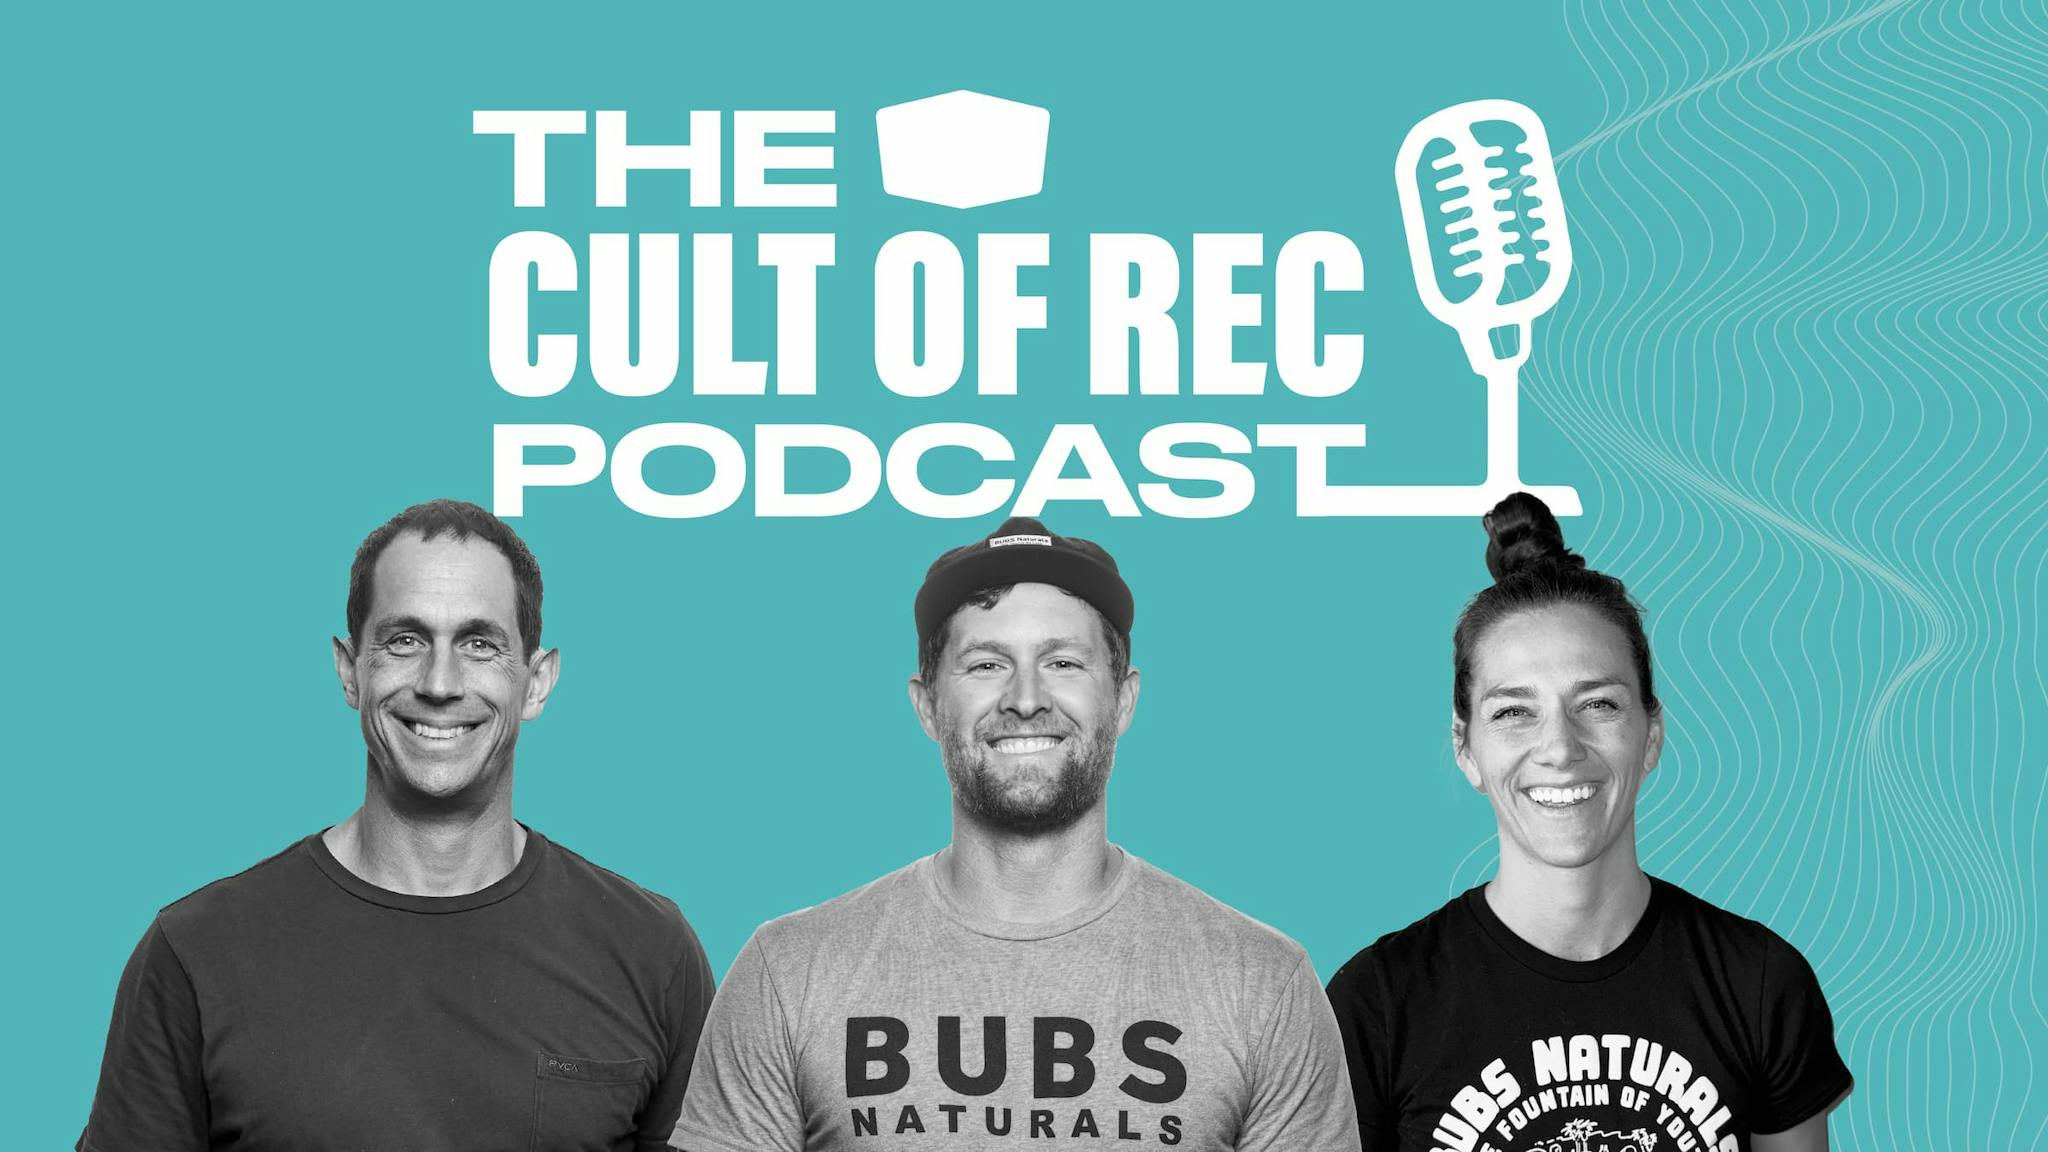 blog Who Was Glen "BUB" Doherty - The Cult of Rec Podcast, Episode 2